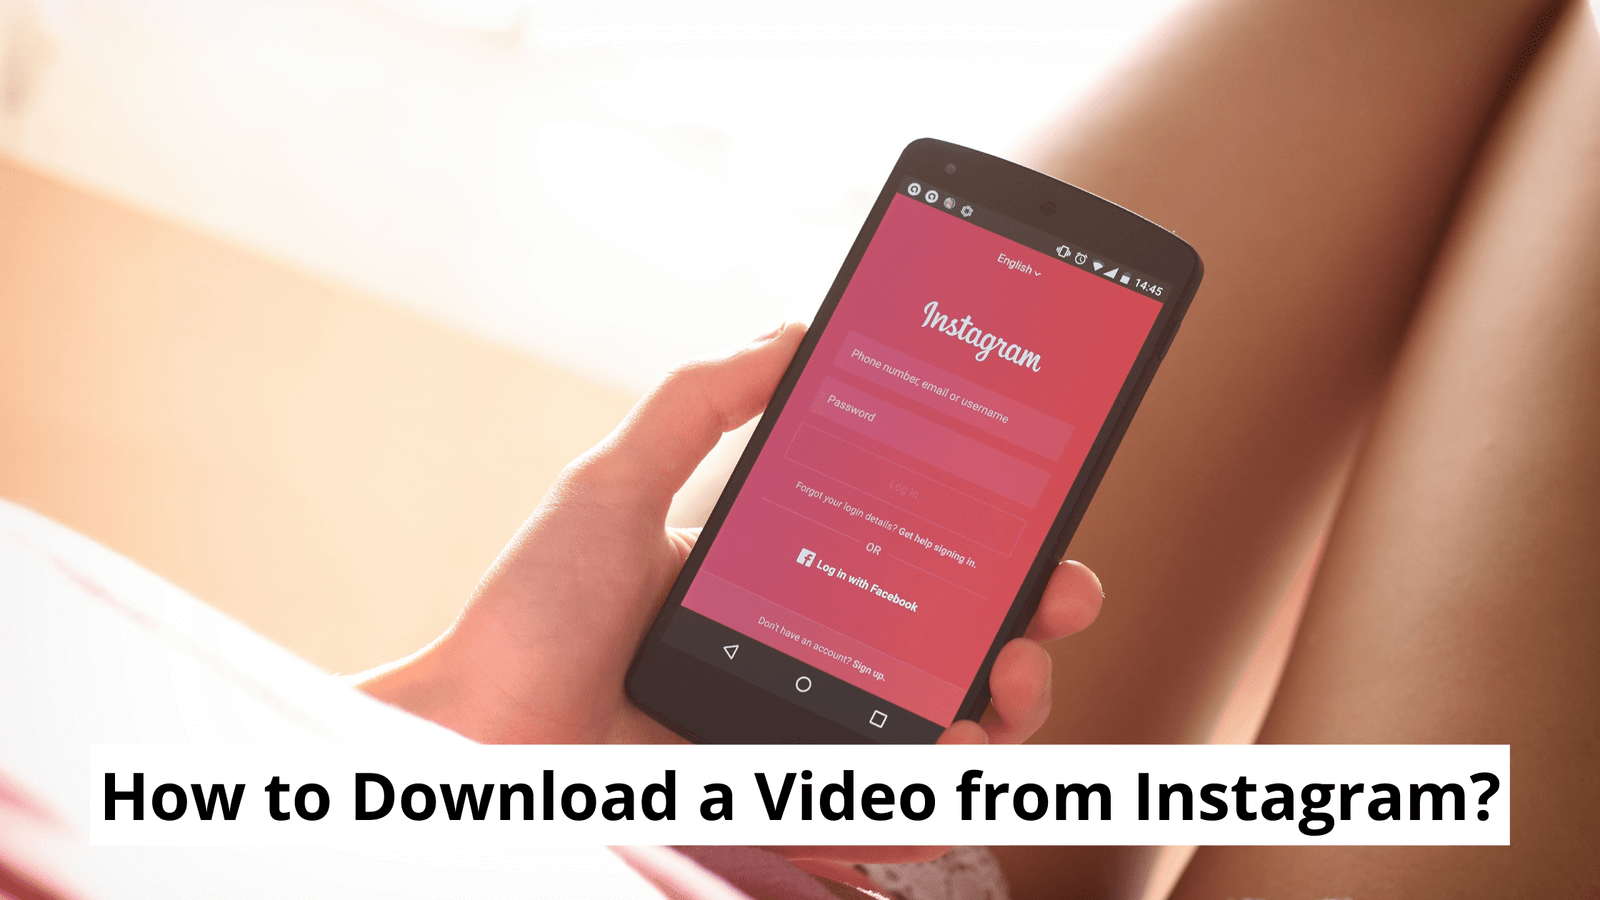 How to Download a Video from Instagram?